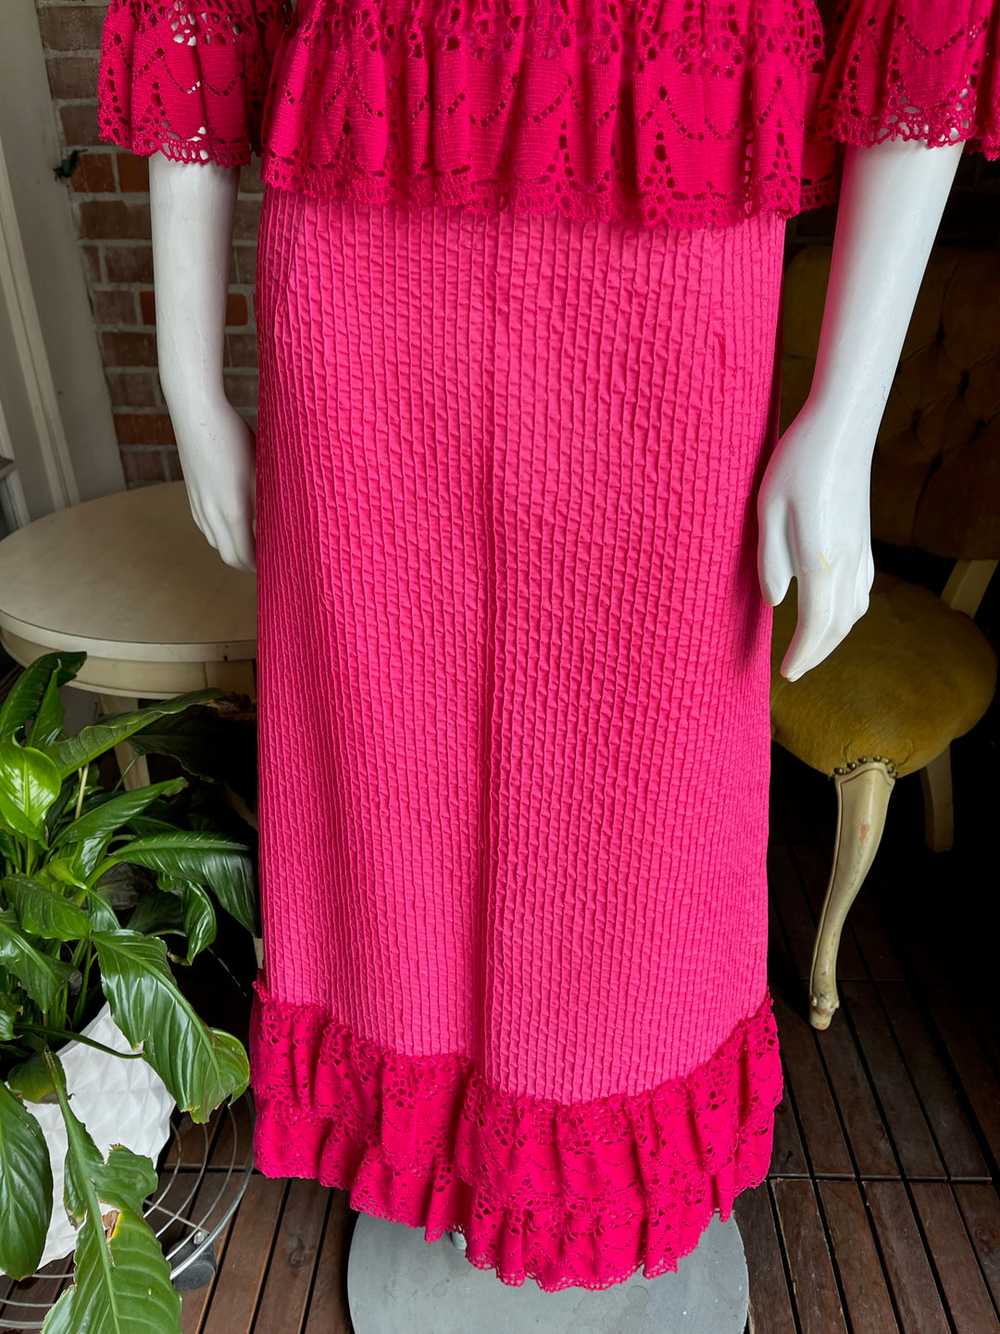 1960s Hot Pink Lace Mexican Dress - image 7